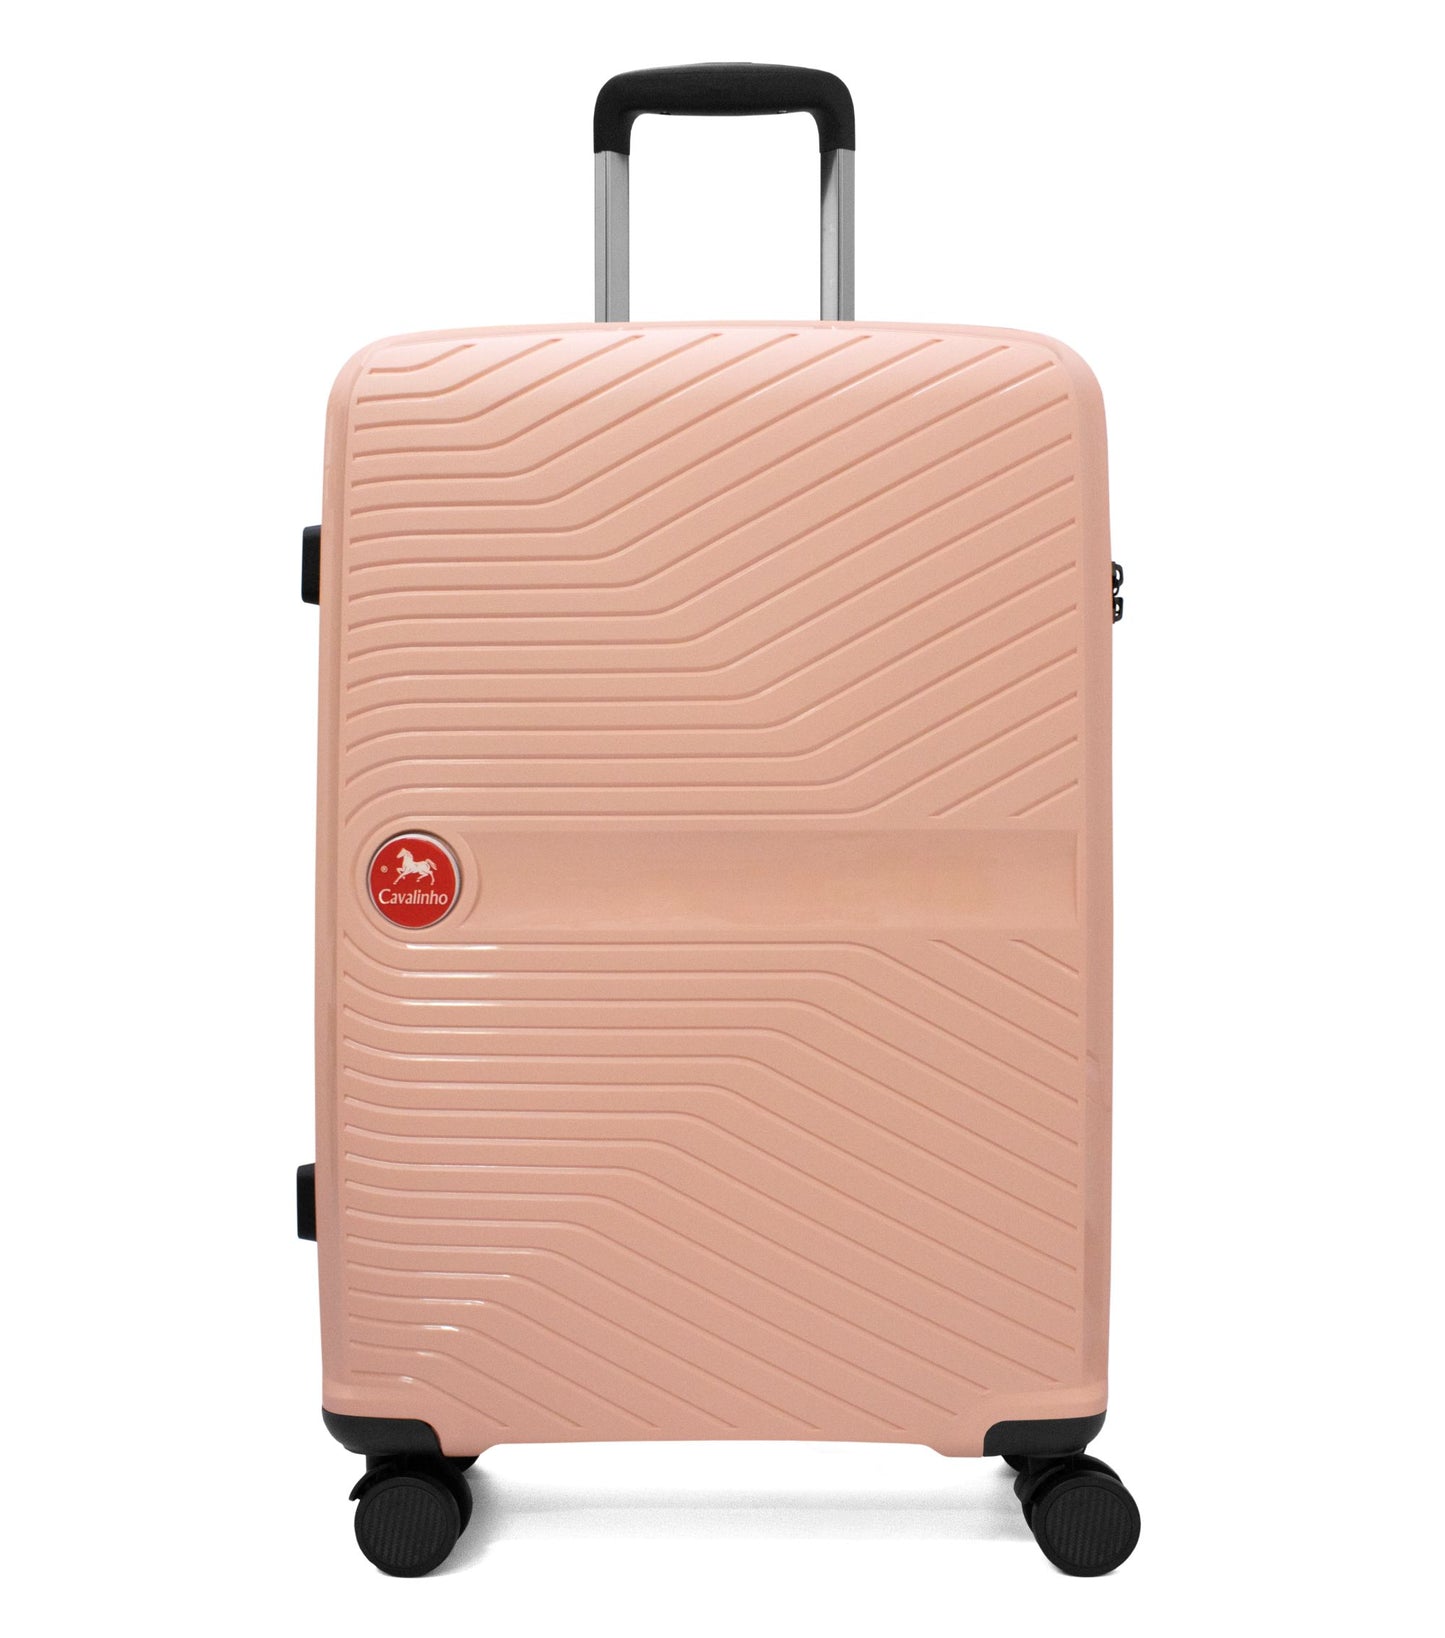 #color_ 24 inch Salmon | Cavalinho Colorful Check-in Hardside Luggage (24") - 24 inch Salmon - 68020004.11.24_1